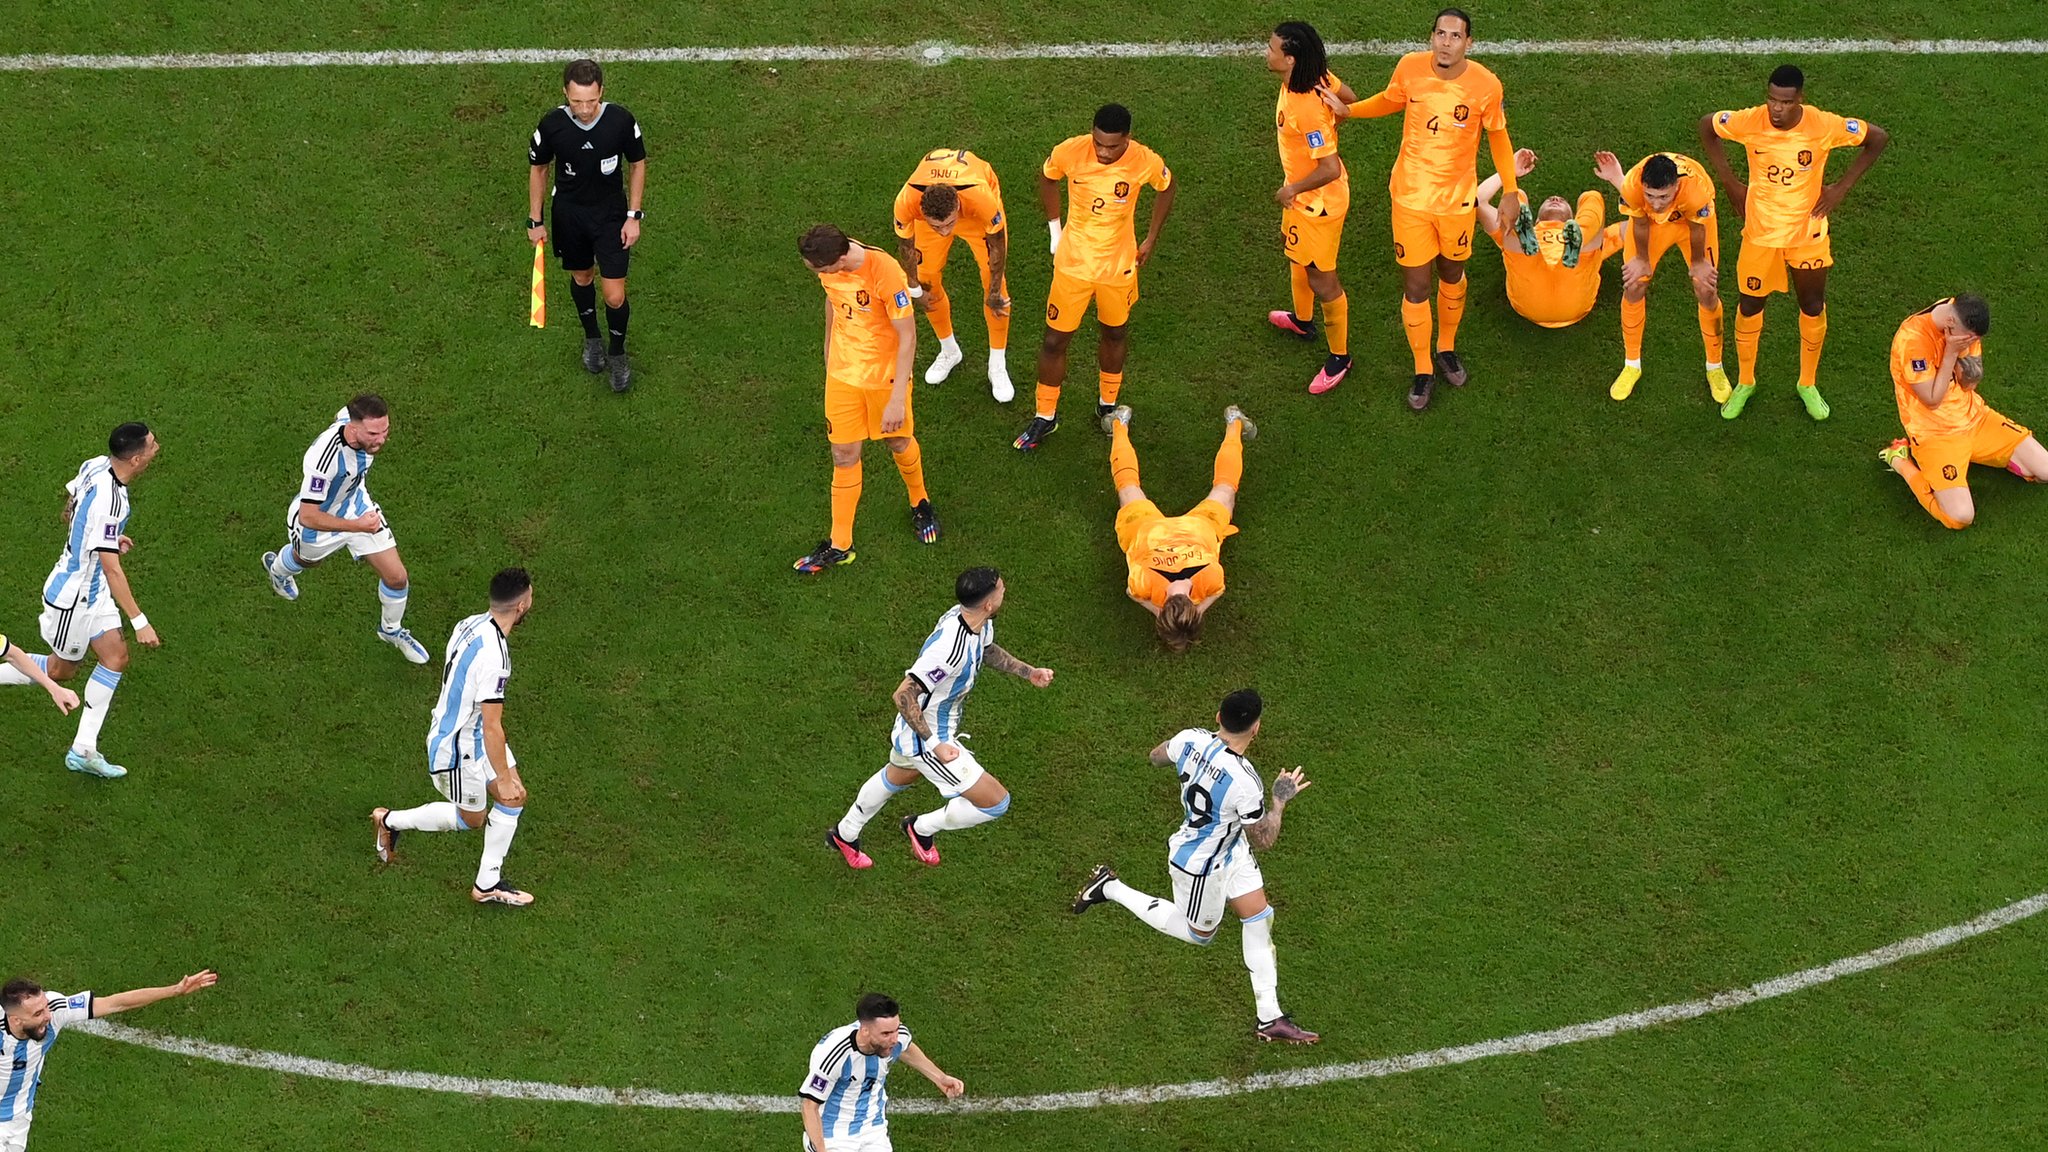 An aerial shot of Argentina's players celebrating in the face of dejected Netherlands players, some lying on the pitch, after winning their penalty shootout